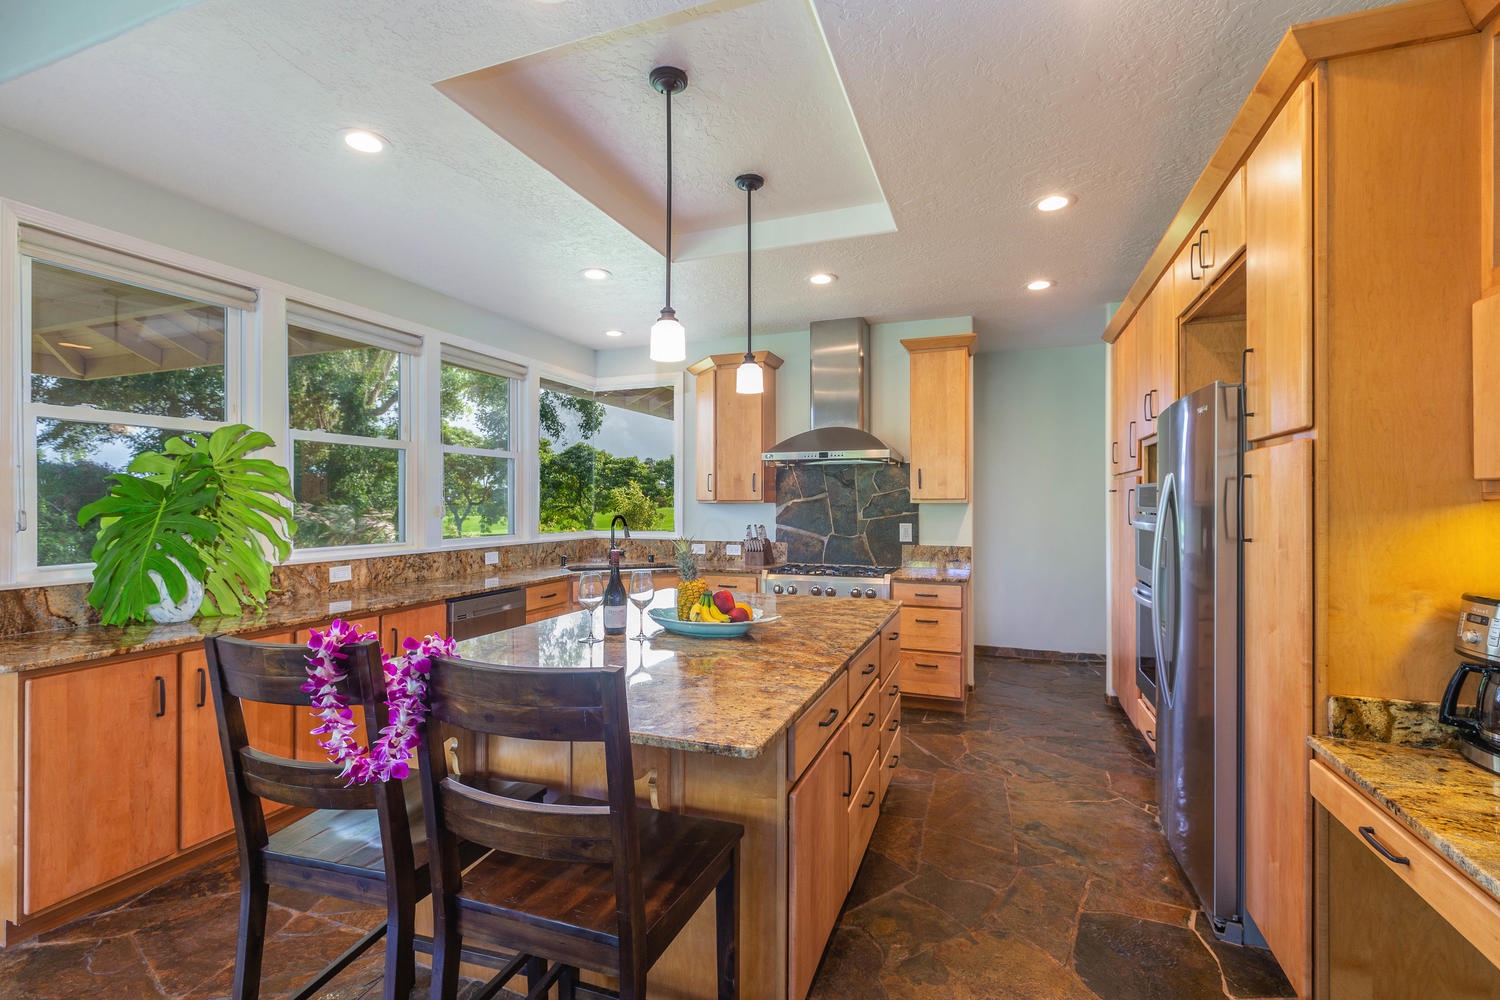 Princeville Vacation Rentals, Pohaku Villa - Kitchen is big and furnished with all the basics